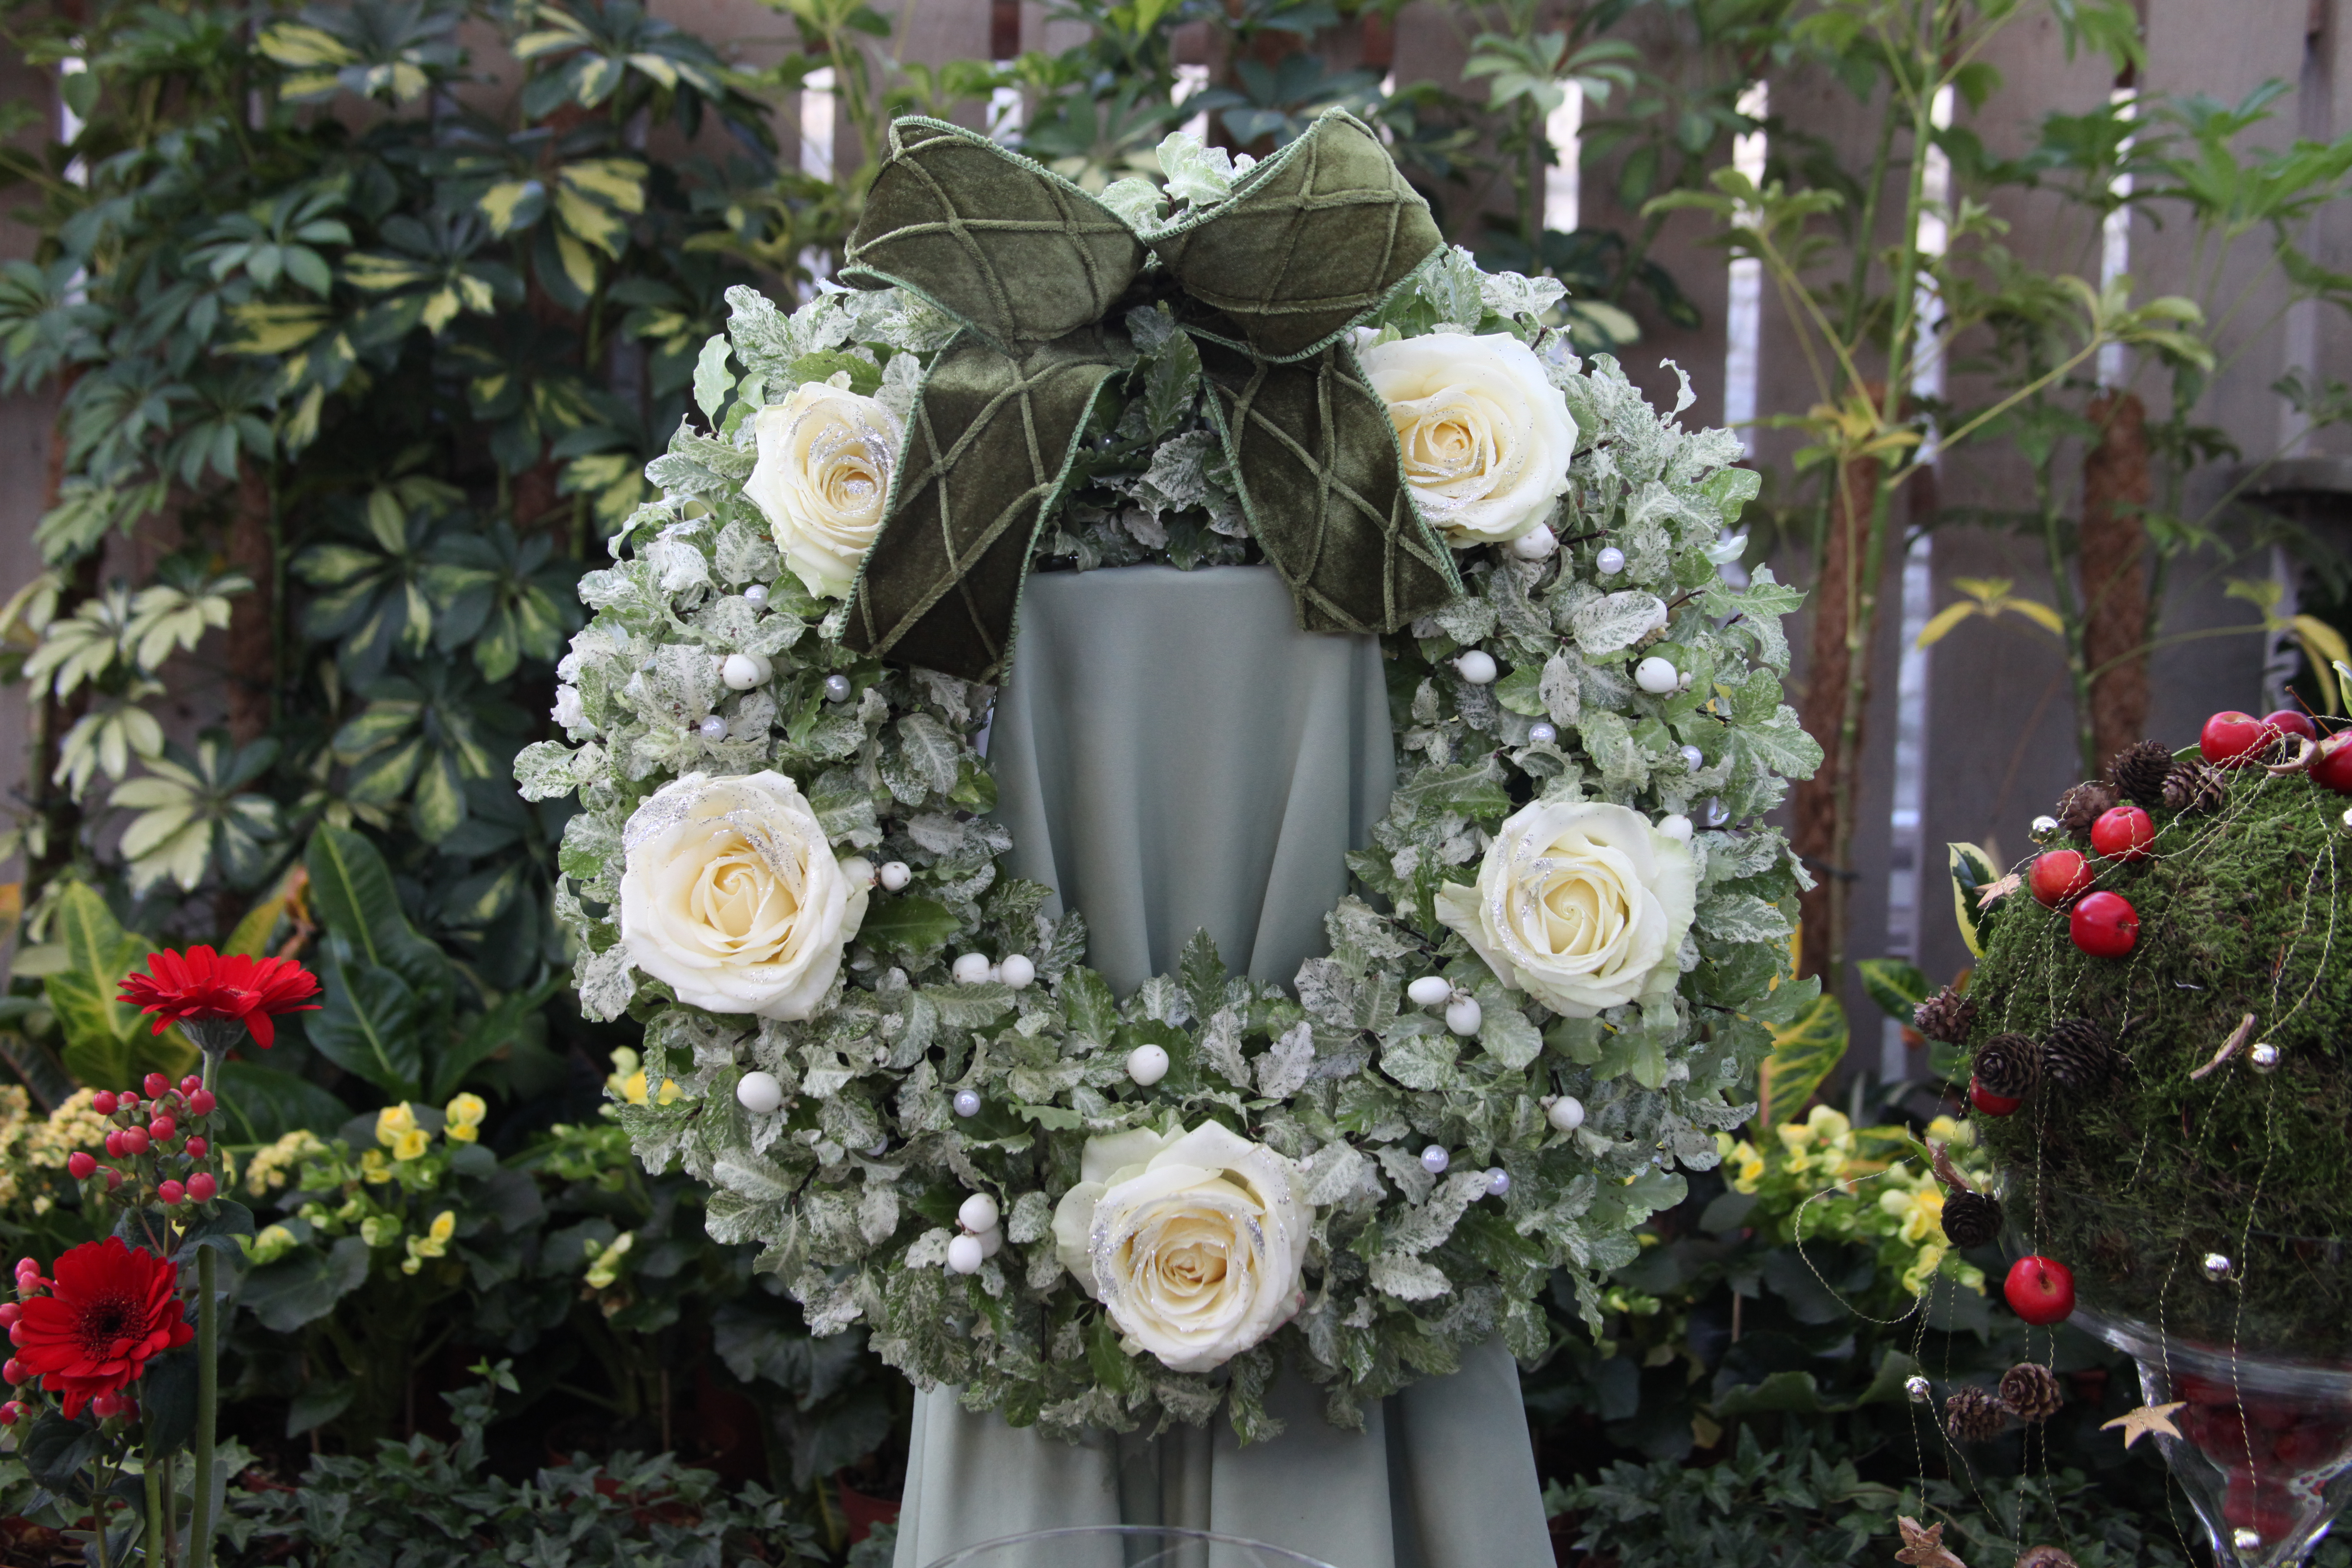 A white winter floral wreath with classic white roses - gorgeous!